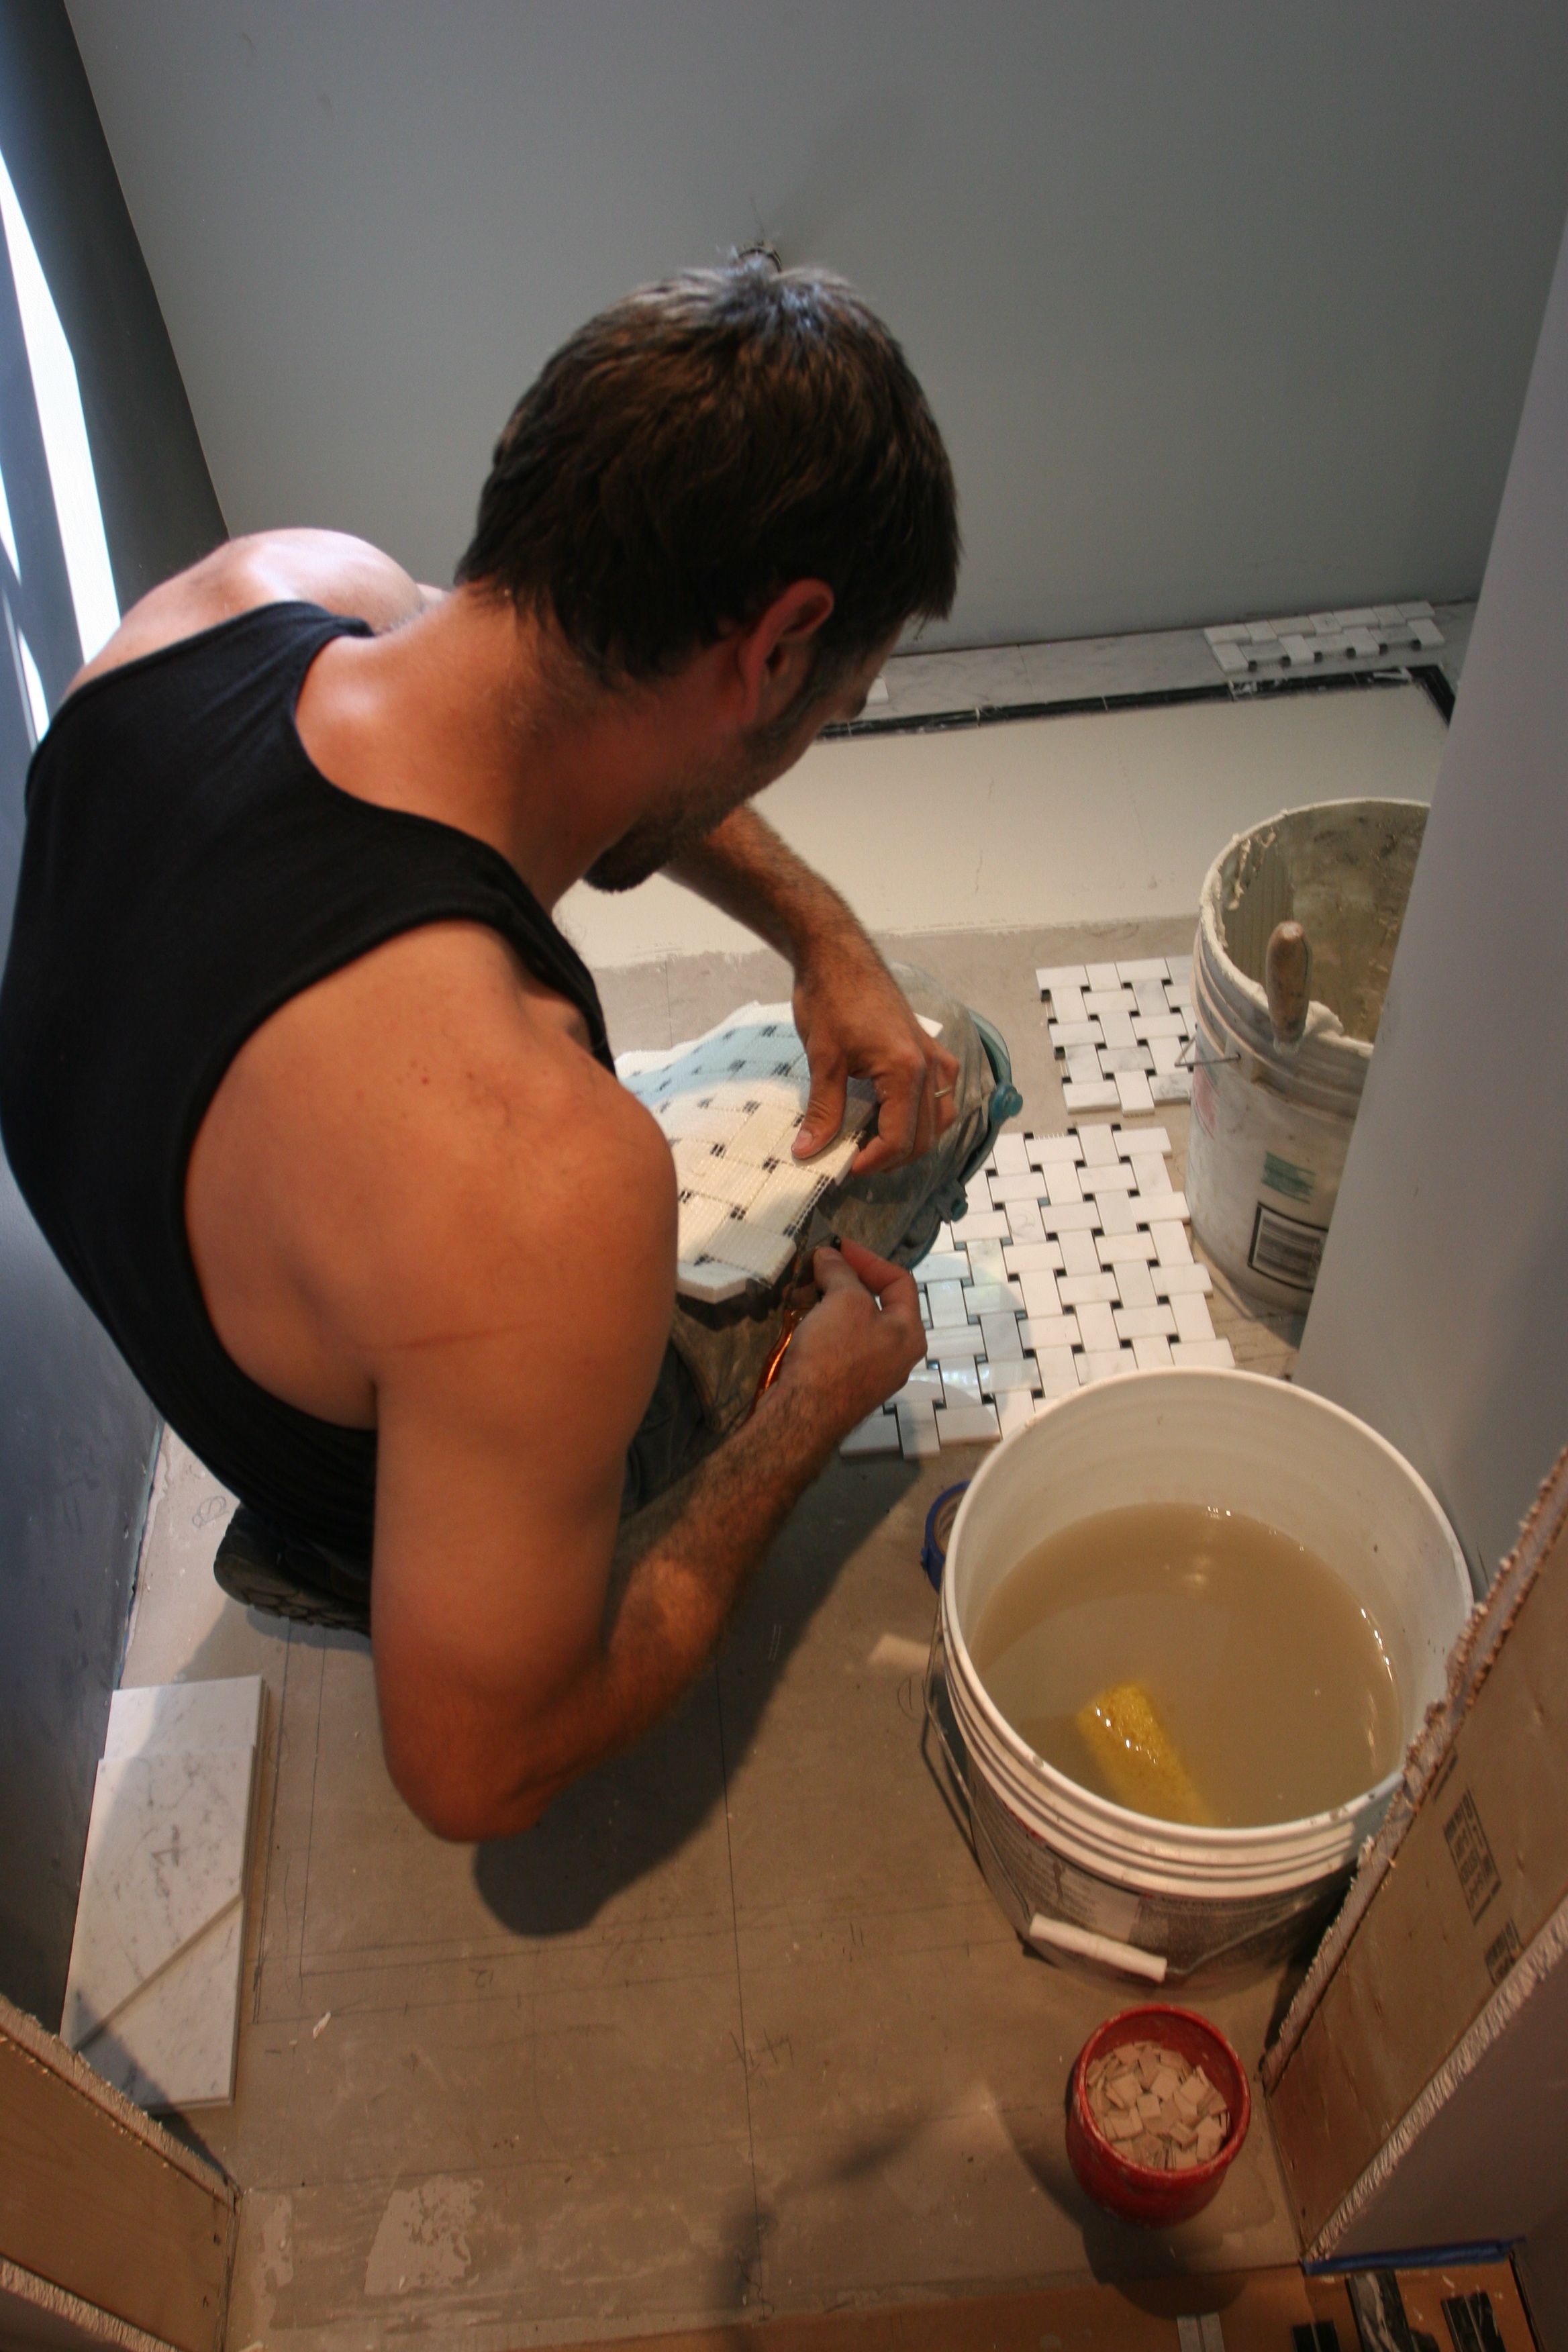 After any adjustments to the amount of thin-set were made, the tile could be laid into place.